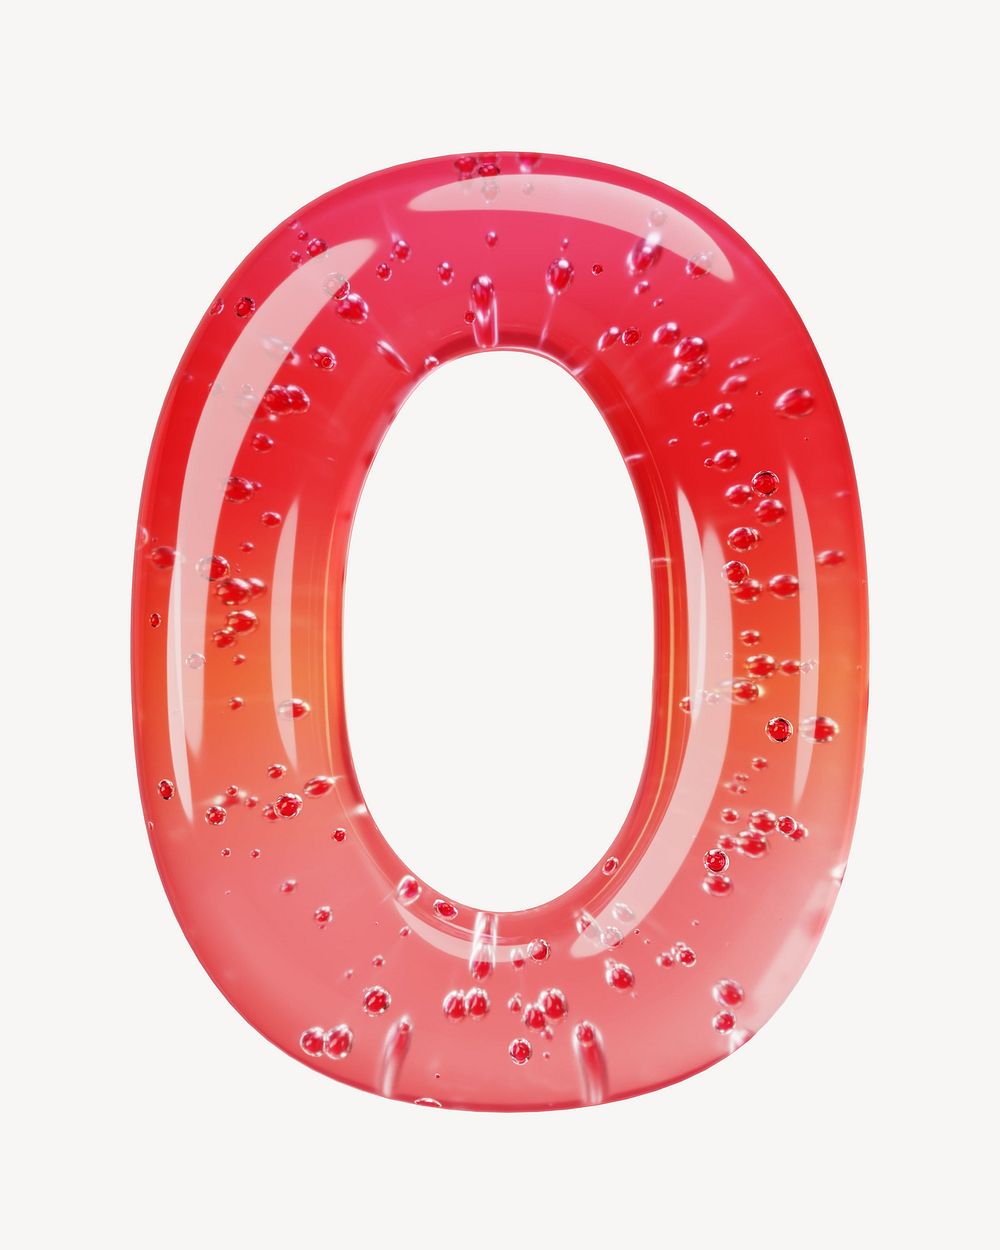 Number 0 3D red jelly illustration